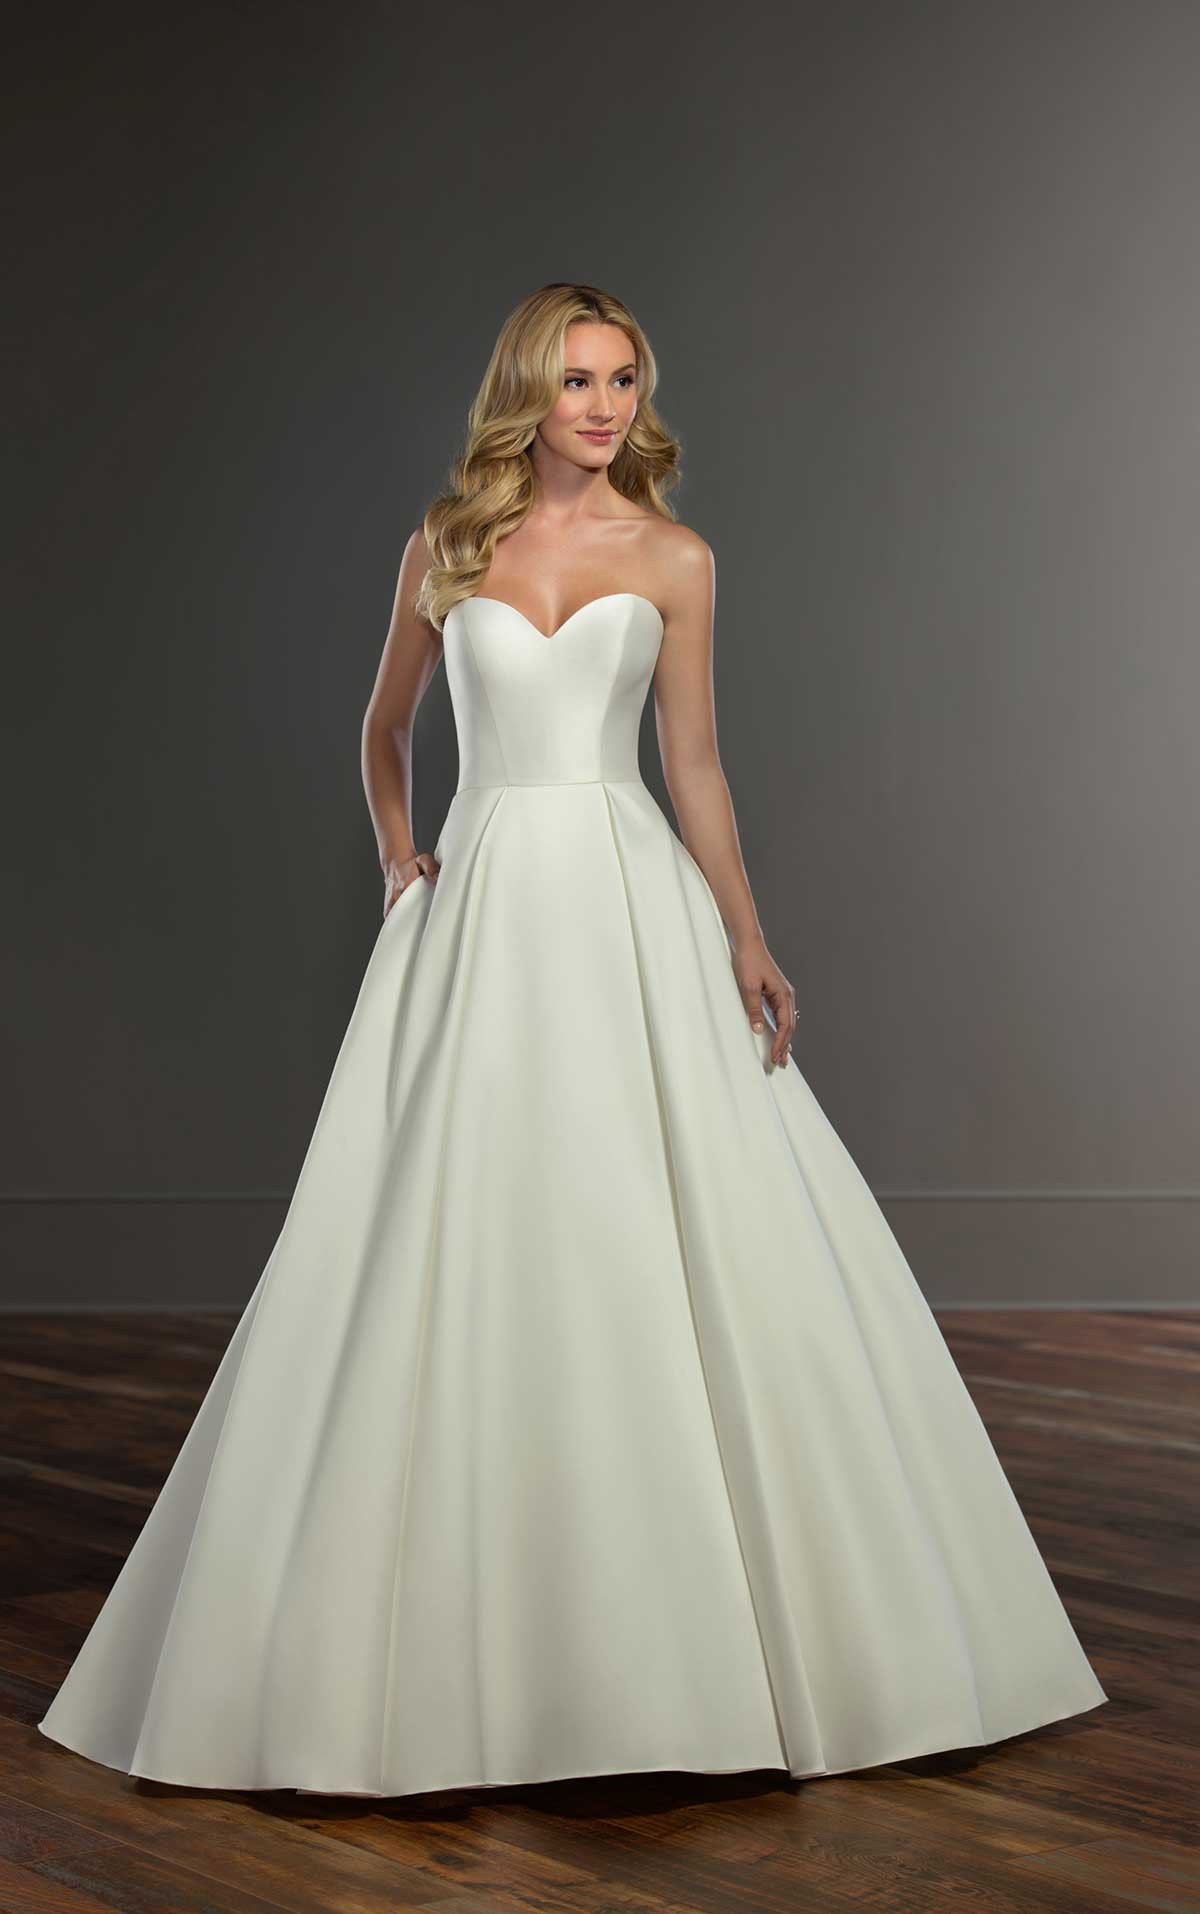 Wedding Ball Gowns
 Simple and Sophisticated Ballgown Wedding Dress